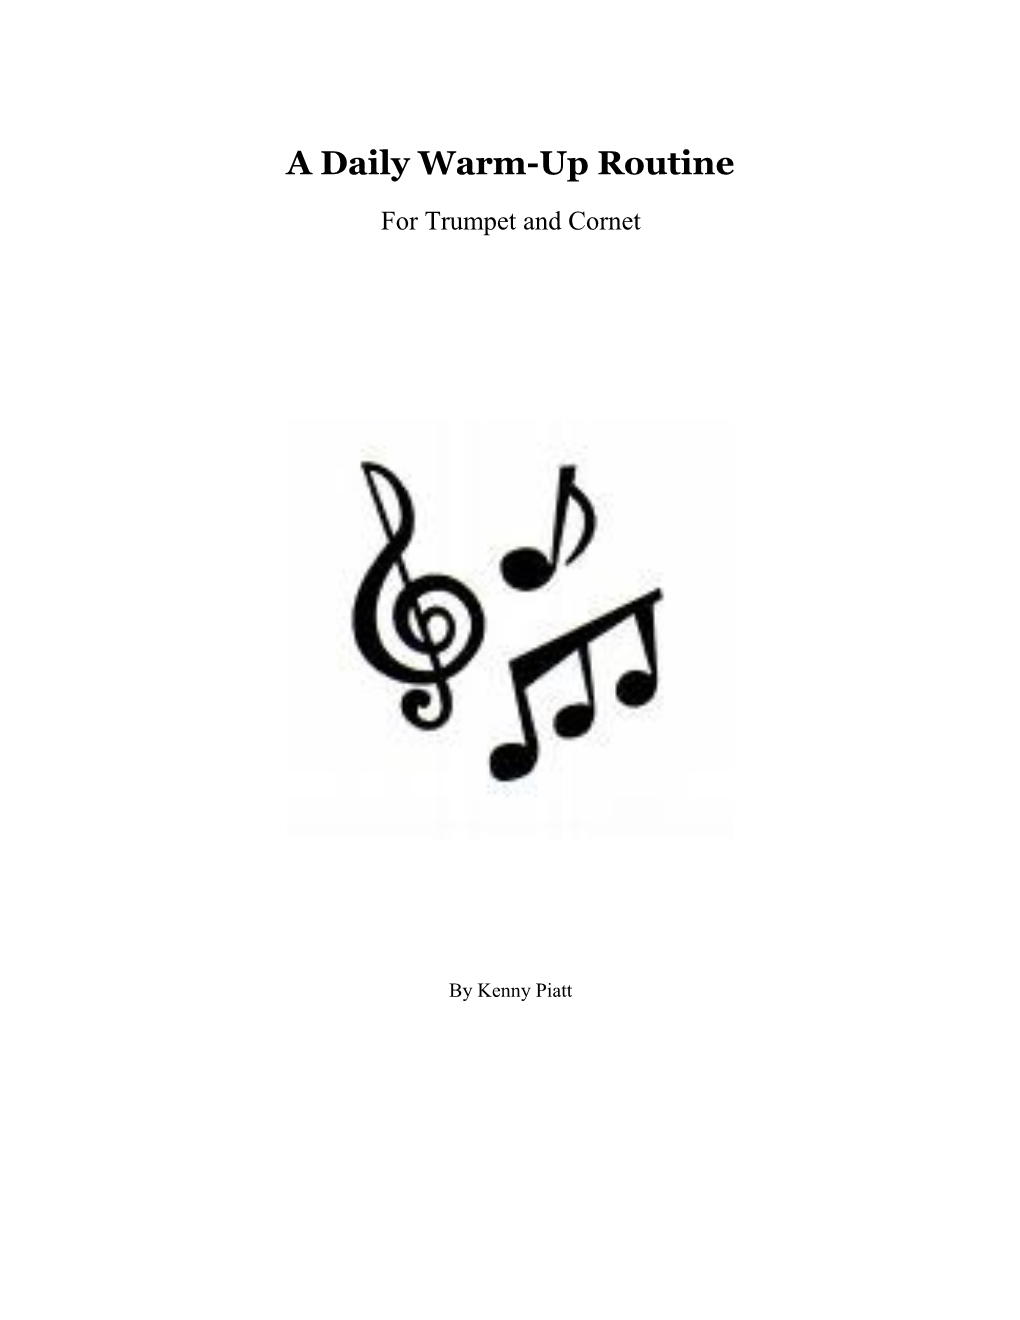 A Daily Warm-Up Routine